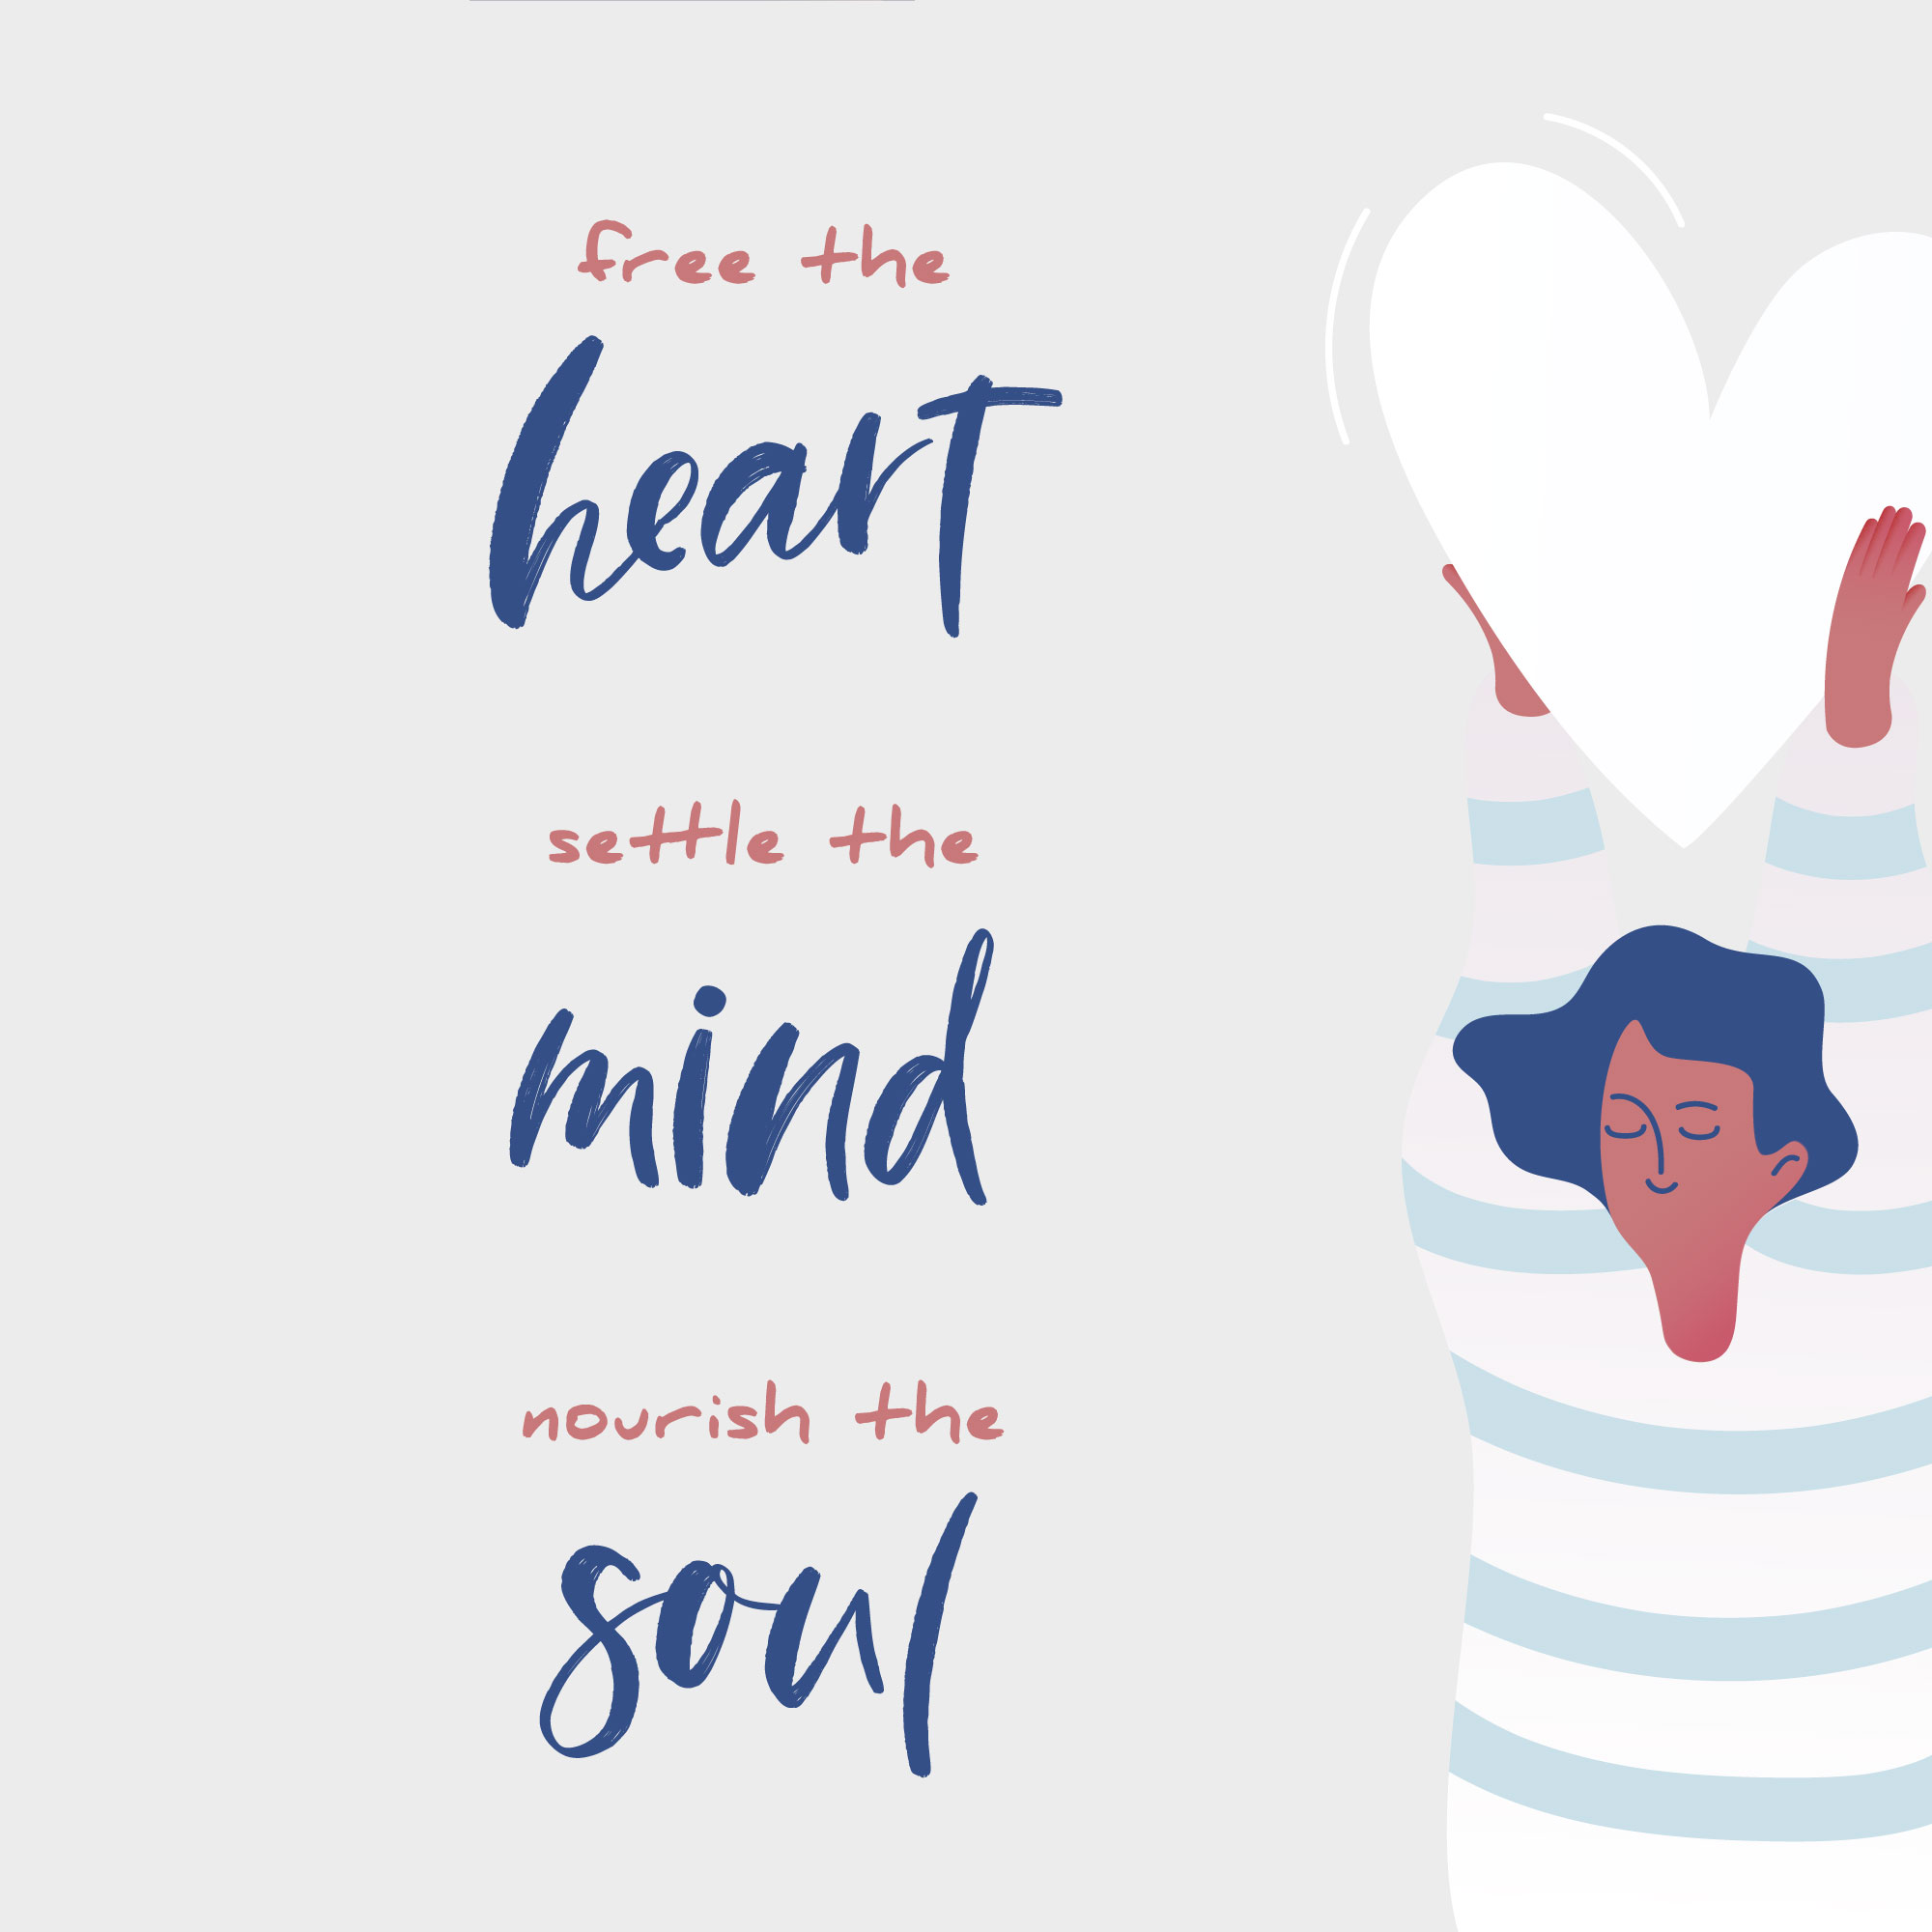 Free the heart, settle the mind, nourish the soul.